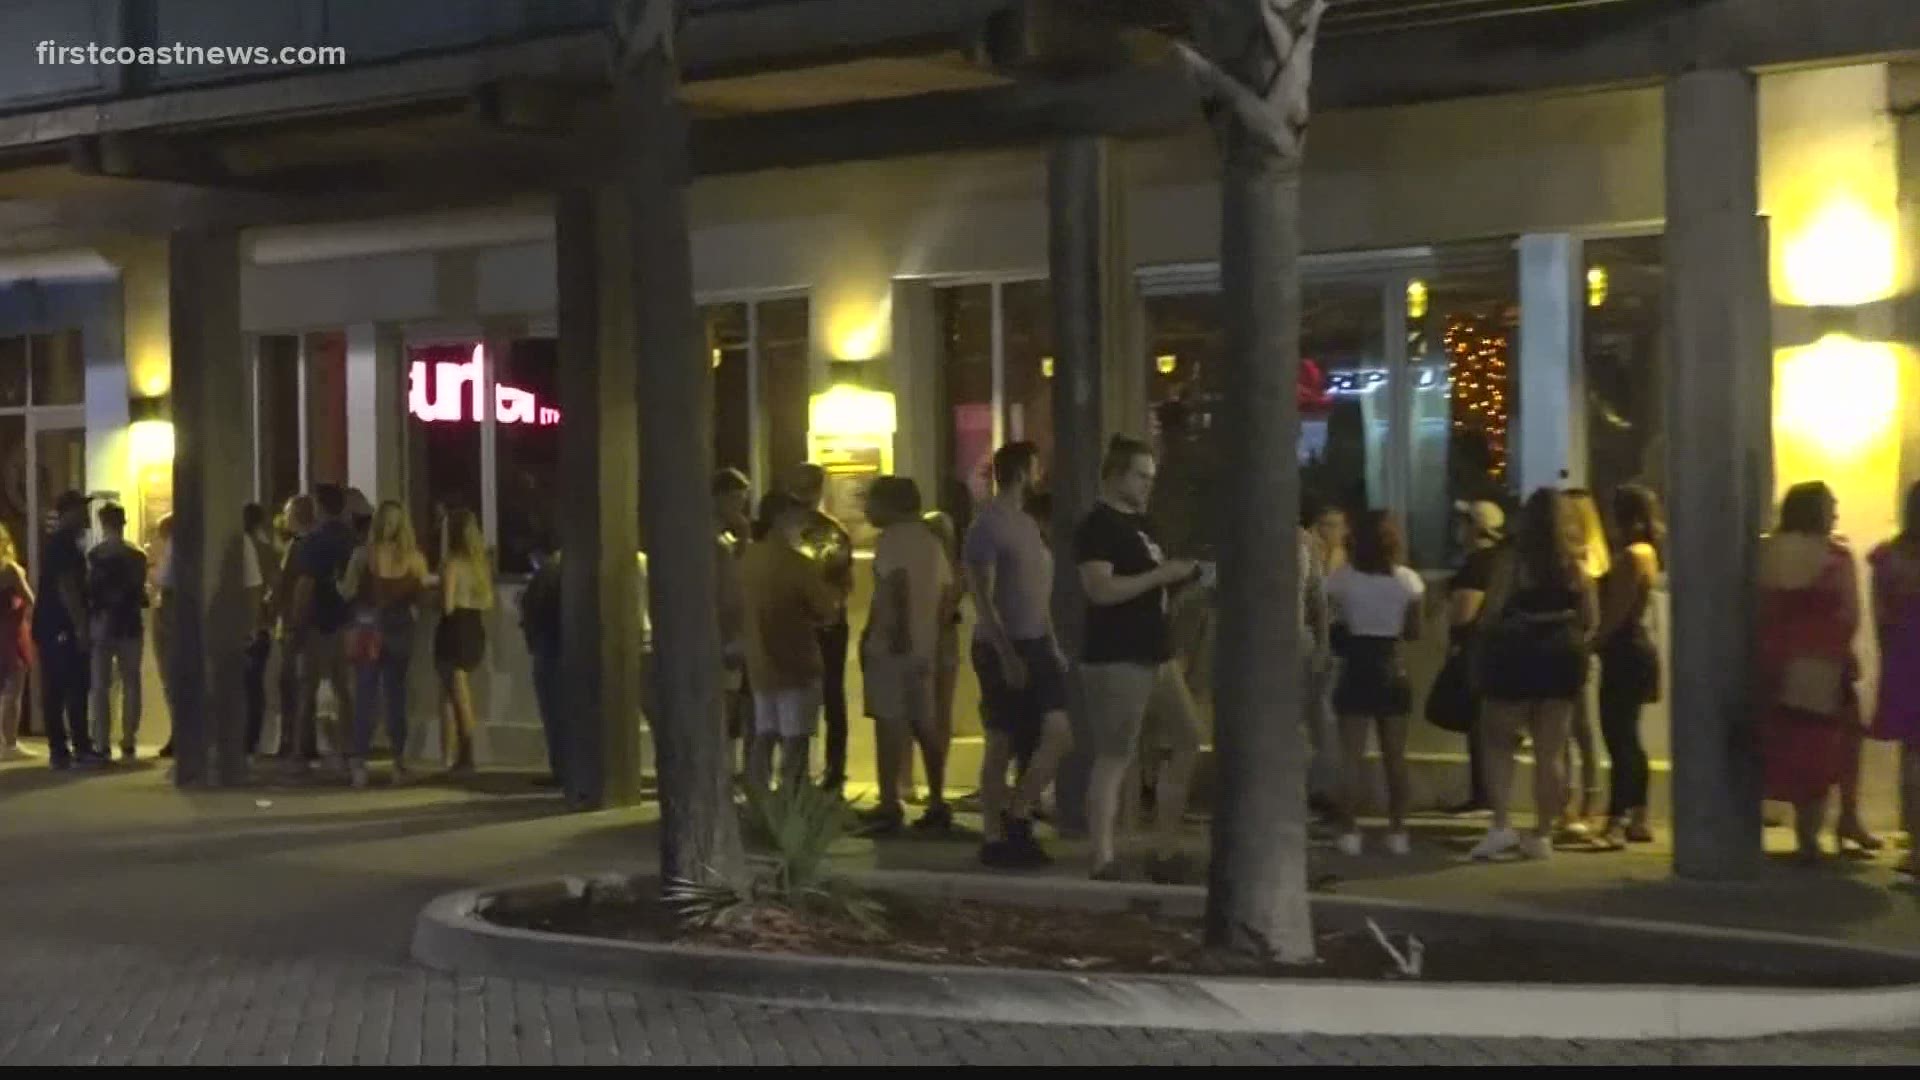 People were able to spread out at the beach, but there was less social distancing at bars later Saturday night.